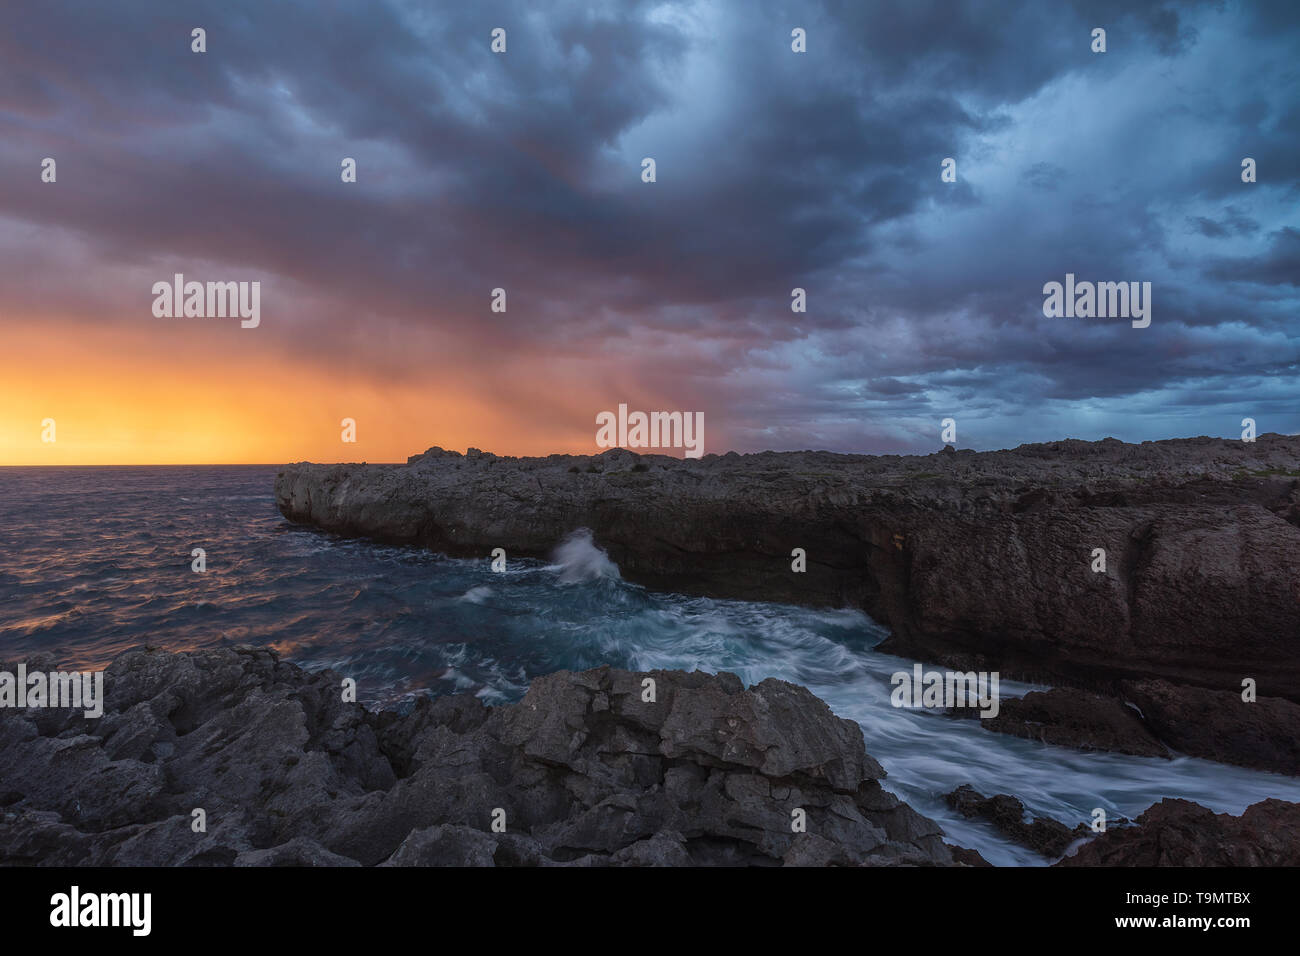 Storm over Islares cliffs in Cantabria, Spain Stock Photo